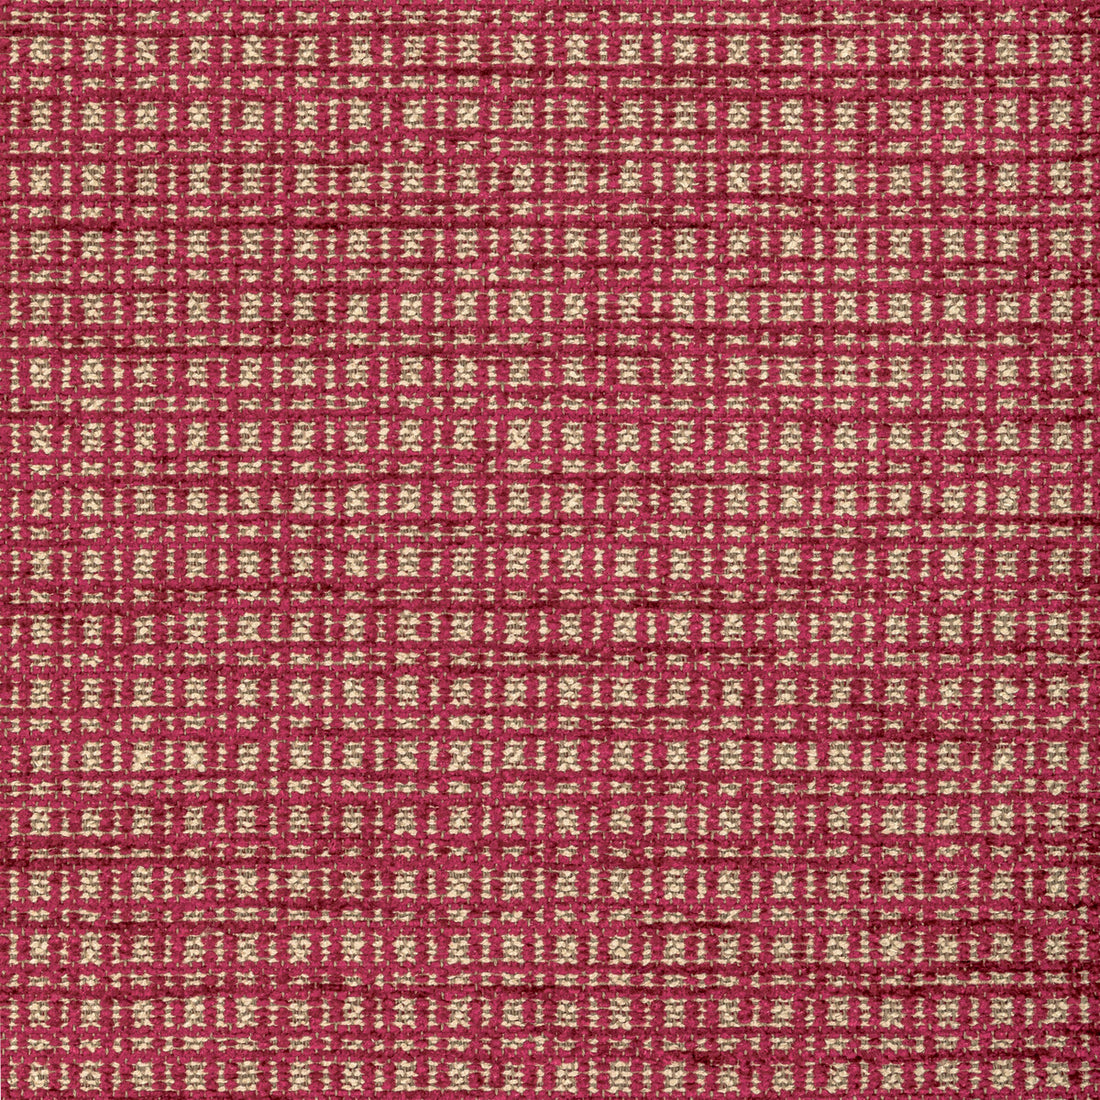 Landiers Texture fabric in red color - pattern 8022123.19.0 - by Brunschwig &amp; Fils in the Chambery Textures III collection